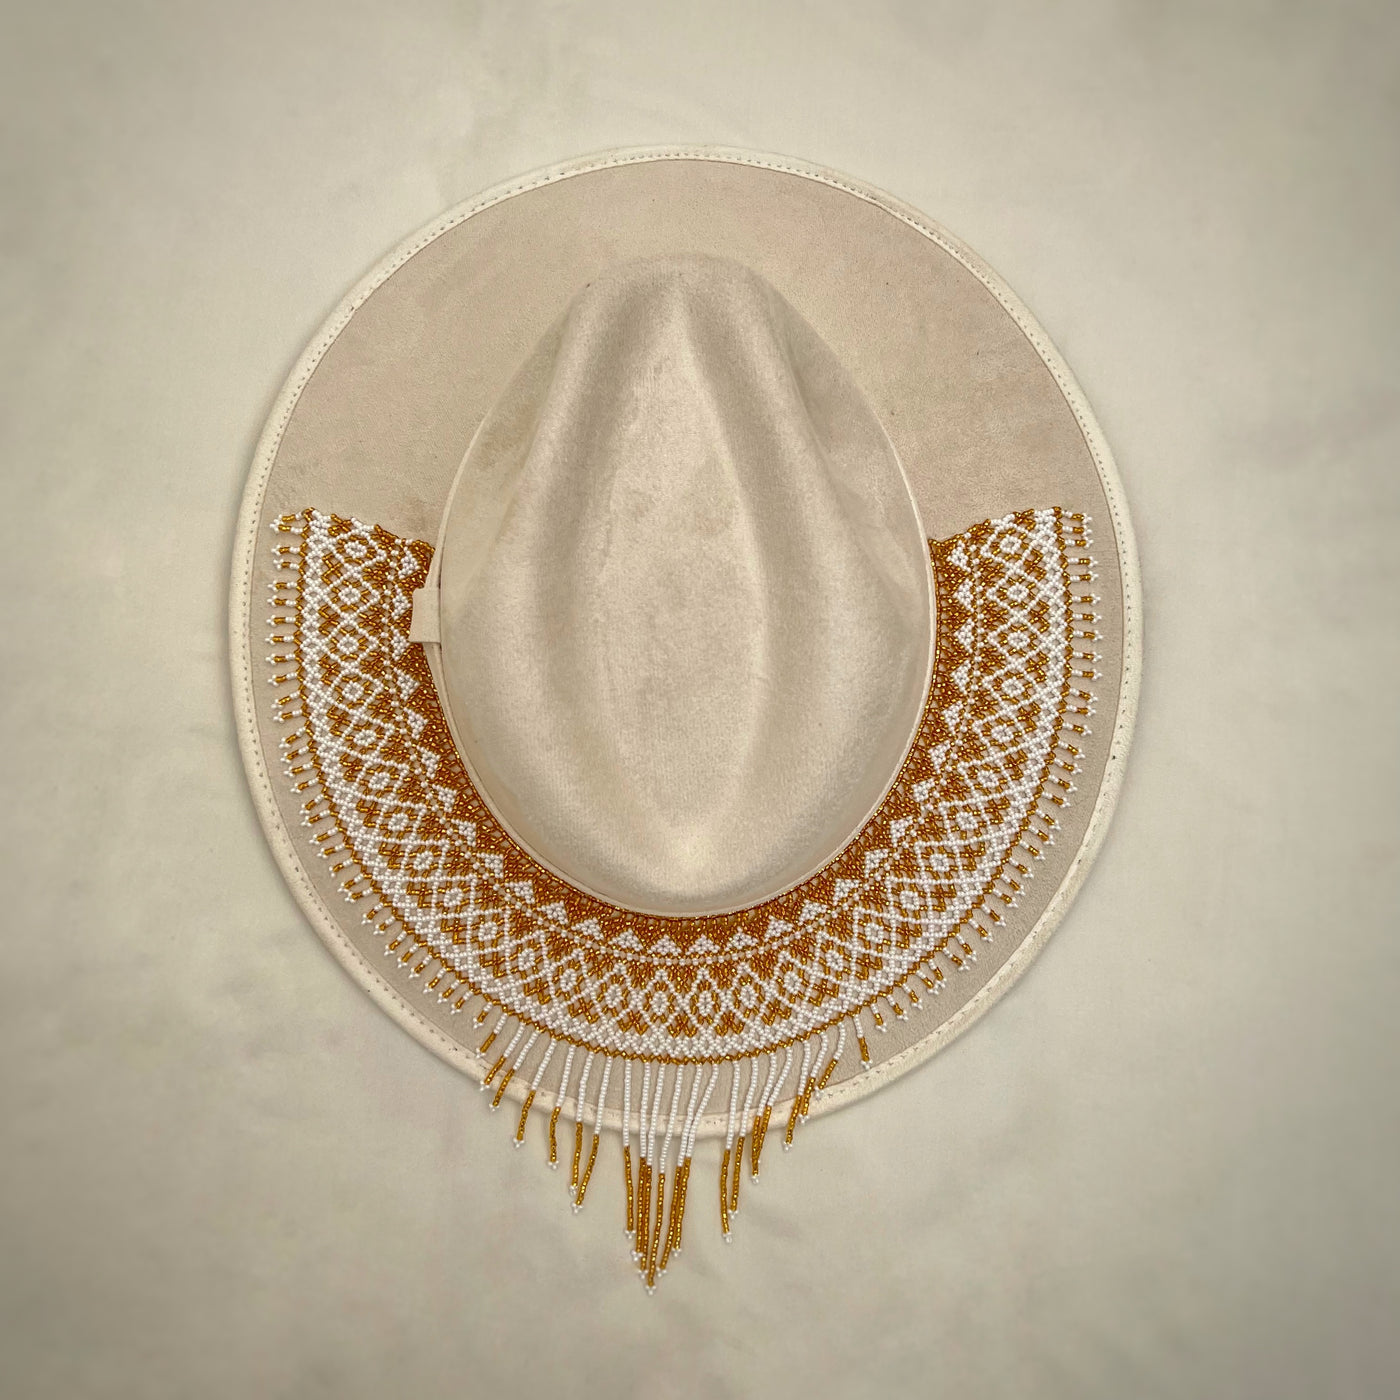 Handmade embroided hat